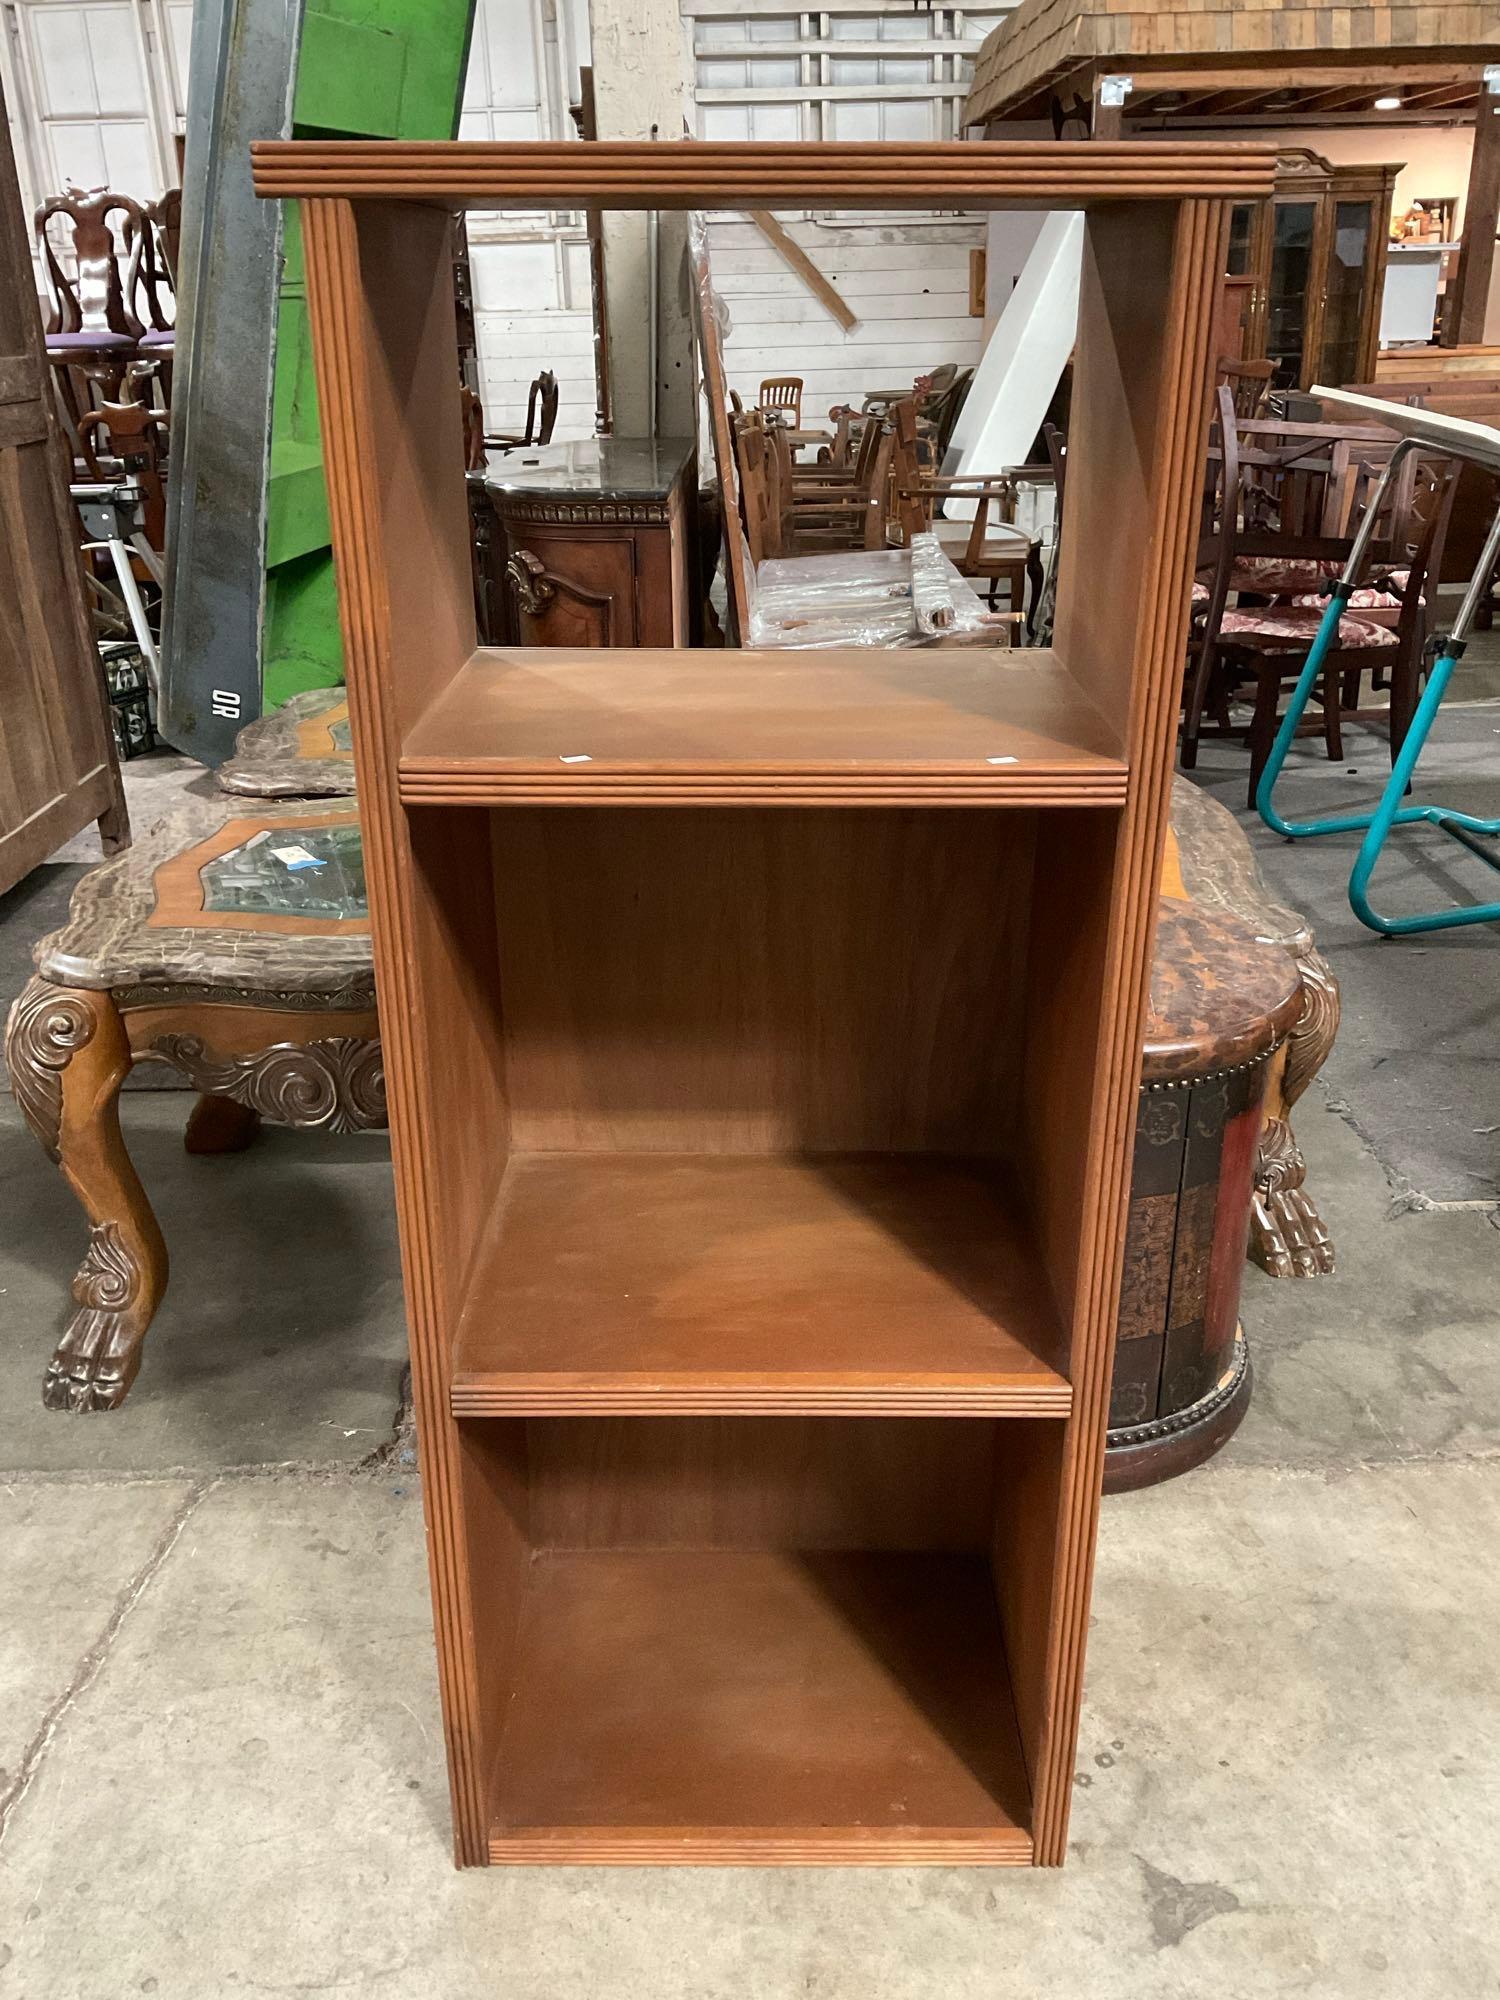 Vintage Zambowood Wooden Bookcase w/ 3 Shelves, 1 Open Back. Measures 24.5" x 57.5" See pics.